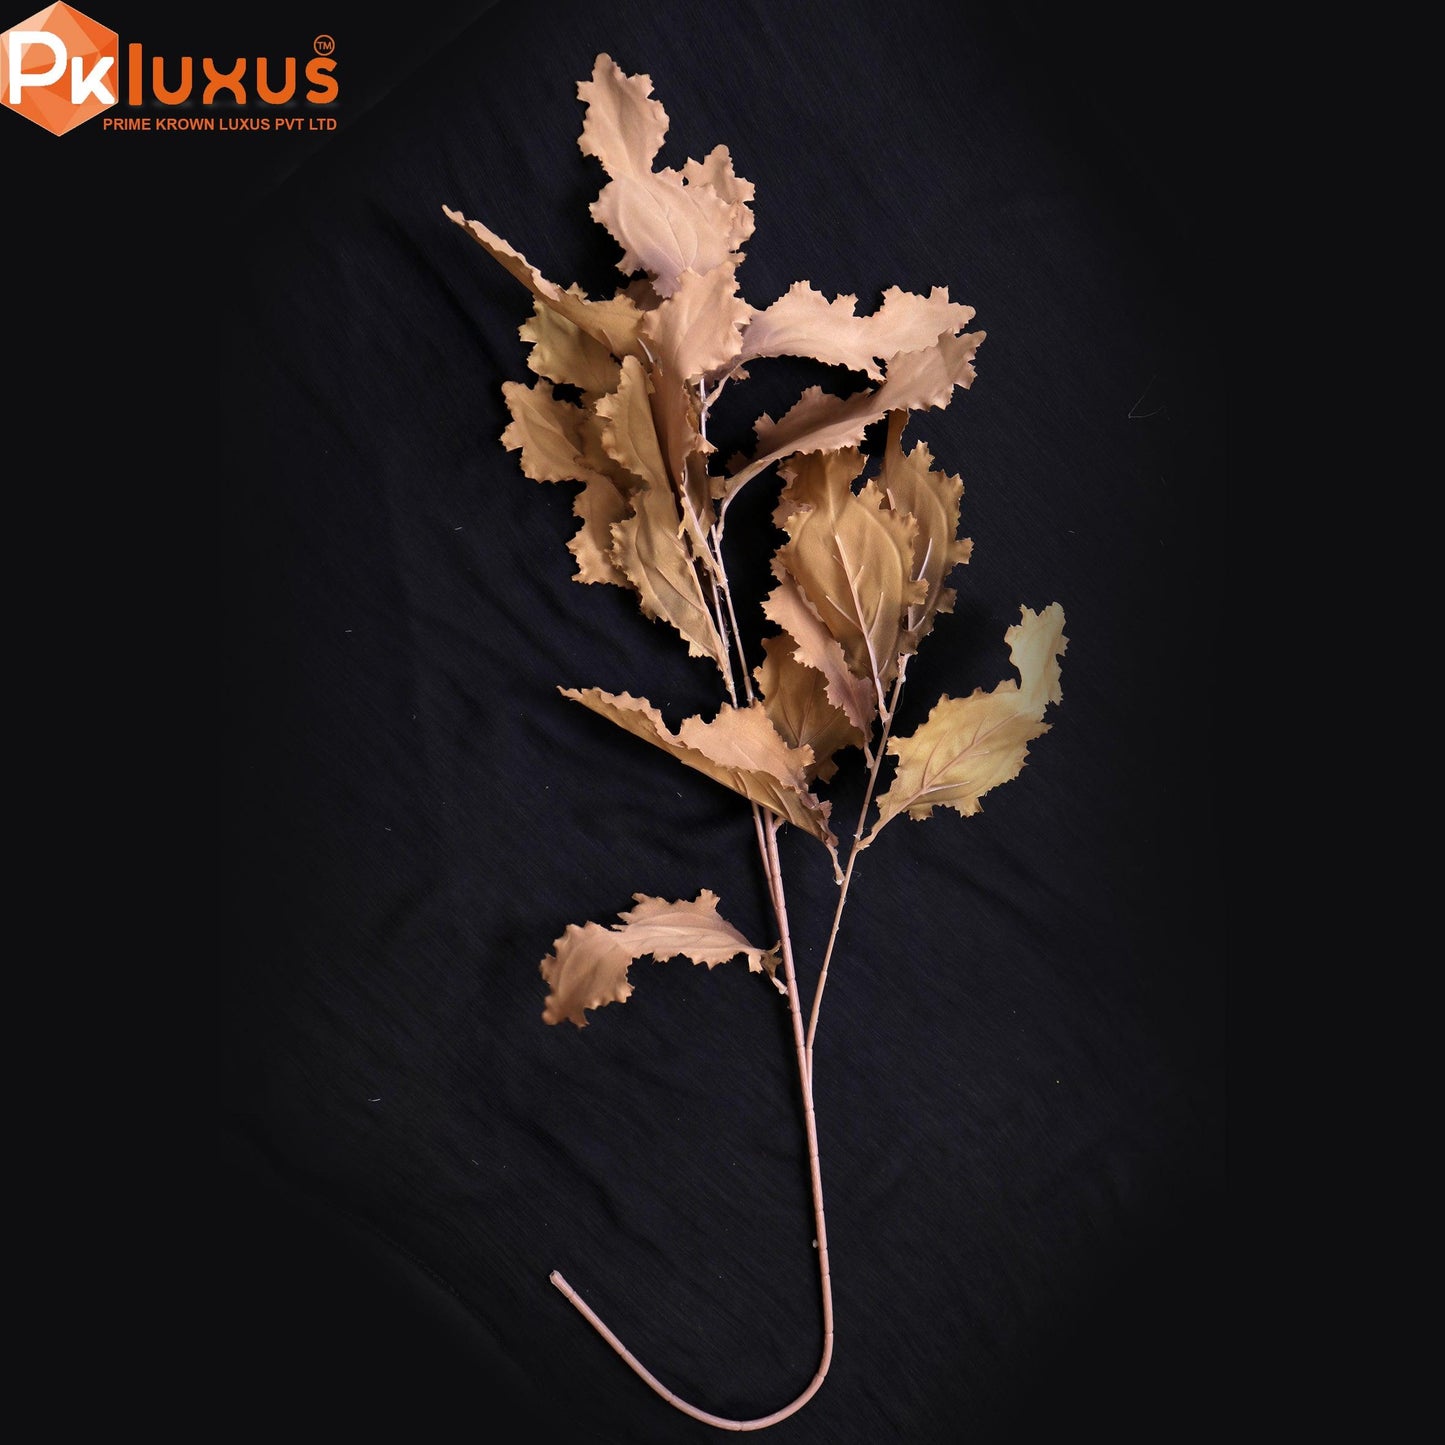 Heritage Leaves Bunch For Vase and Jars Decoration | PK LUXUS™ - PK LUXUS